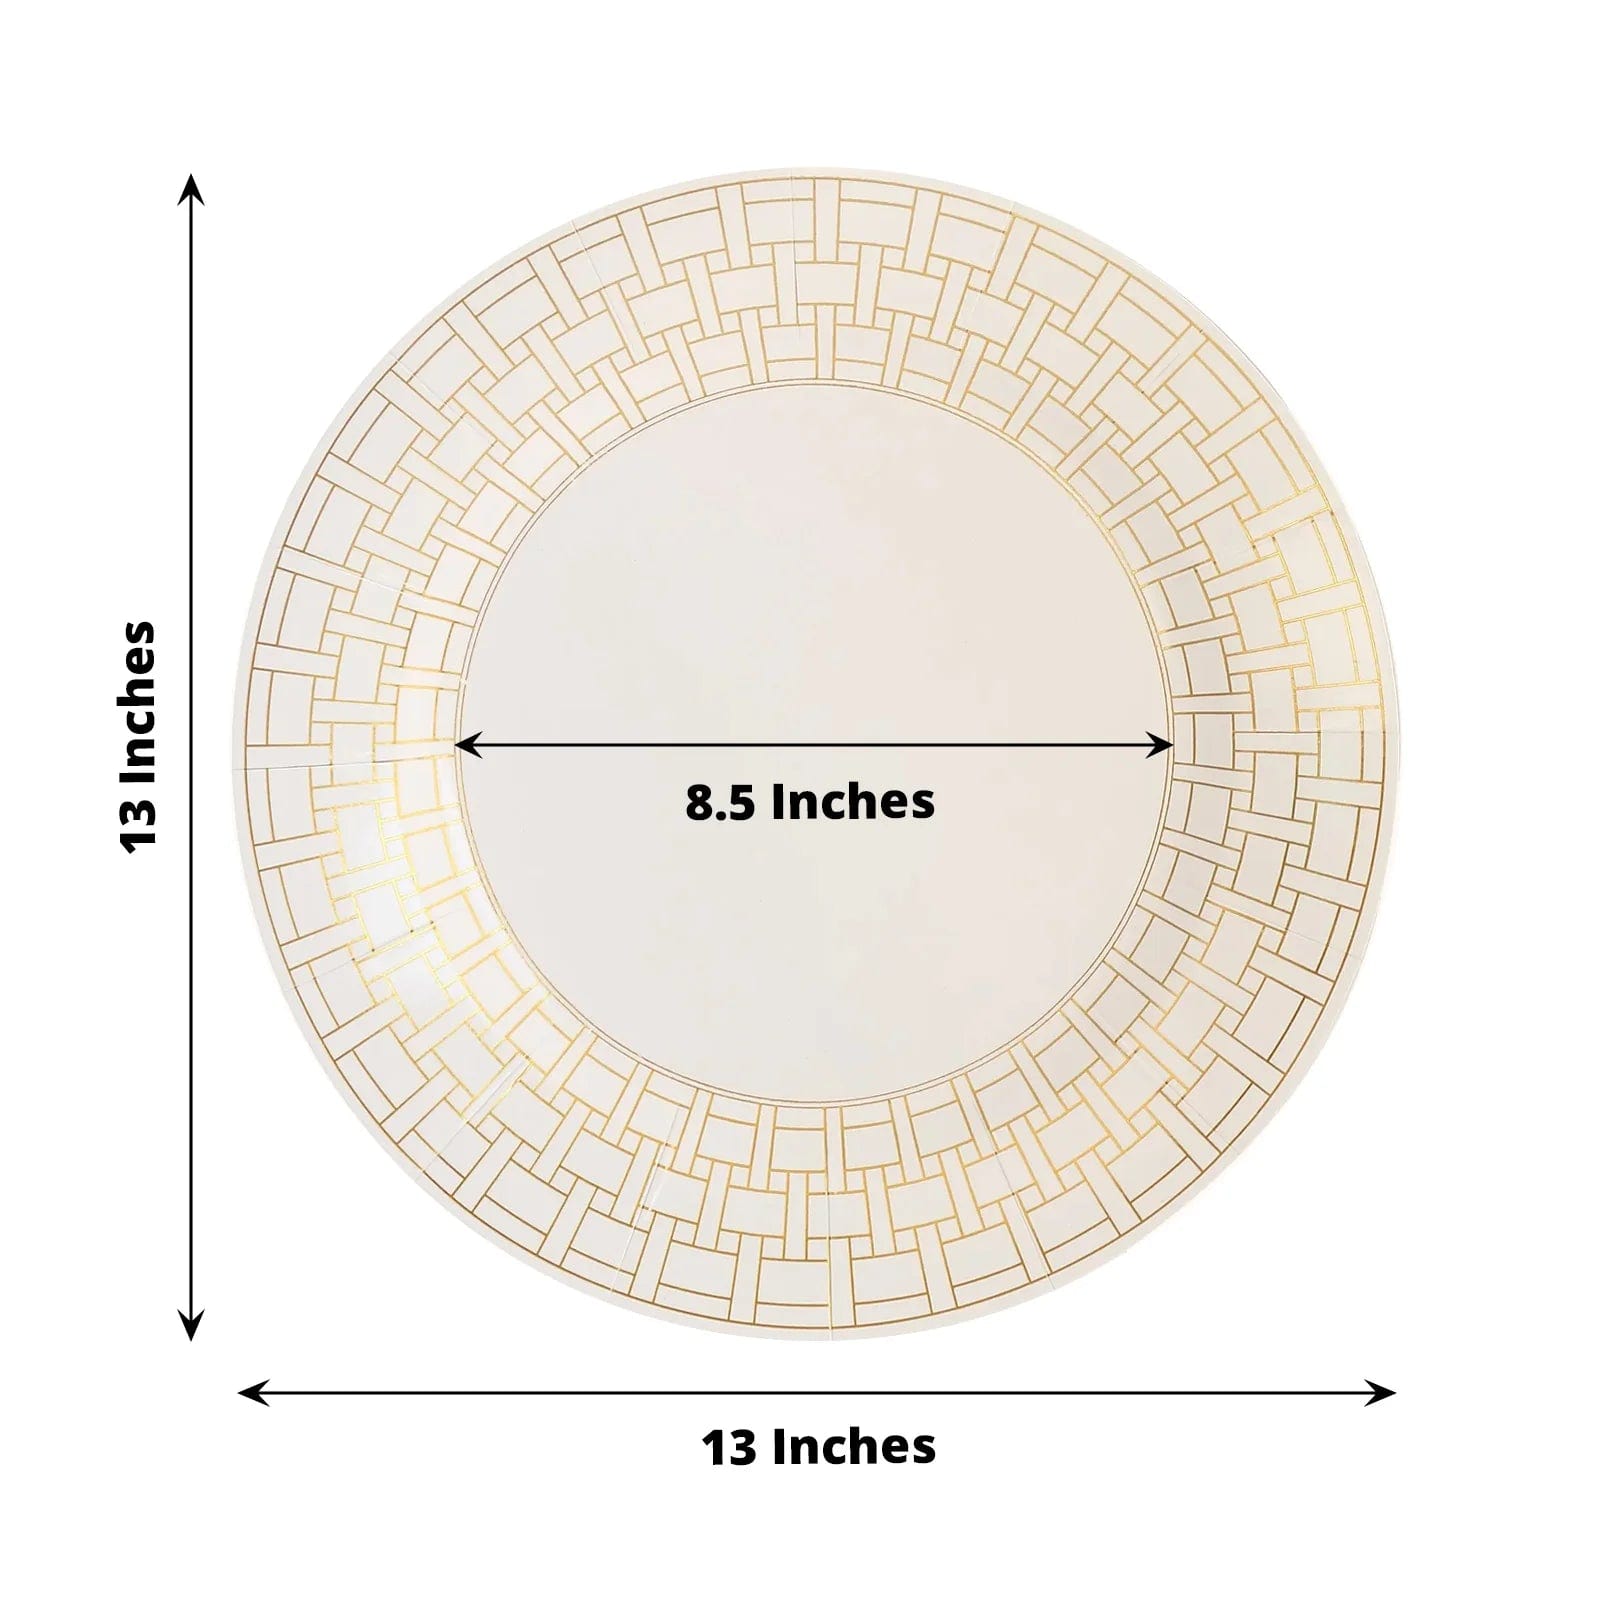 10 Cardstock Paper Charger Plates with Basketweave Pattern Rim - White and Gold DSP_CHRG_R0028_WHGD